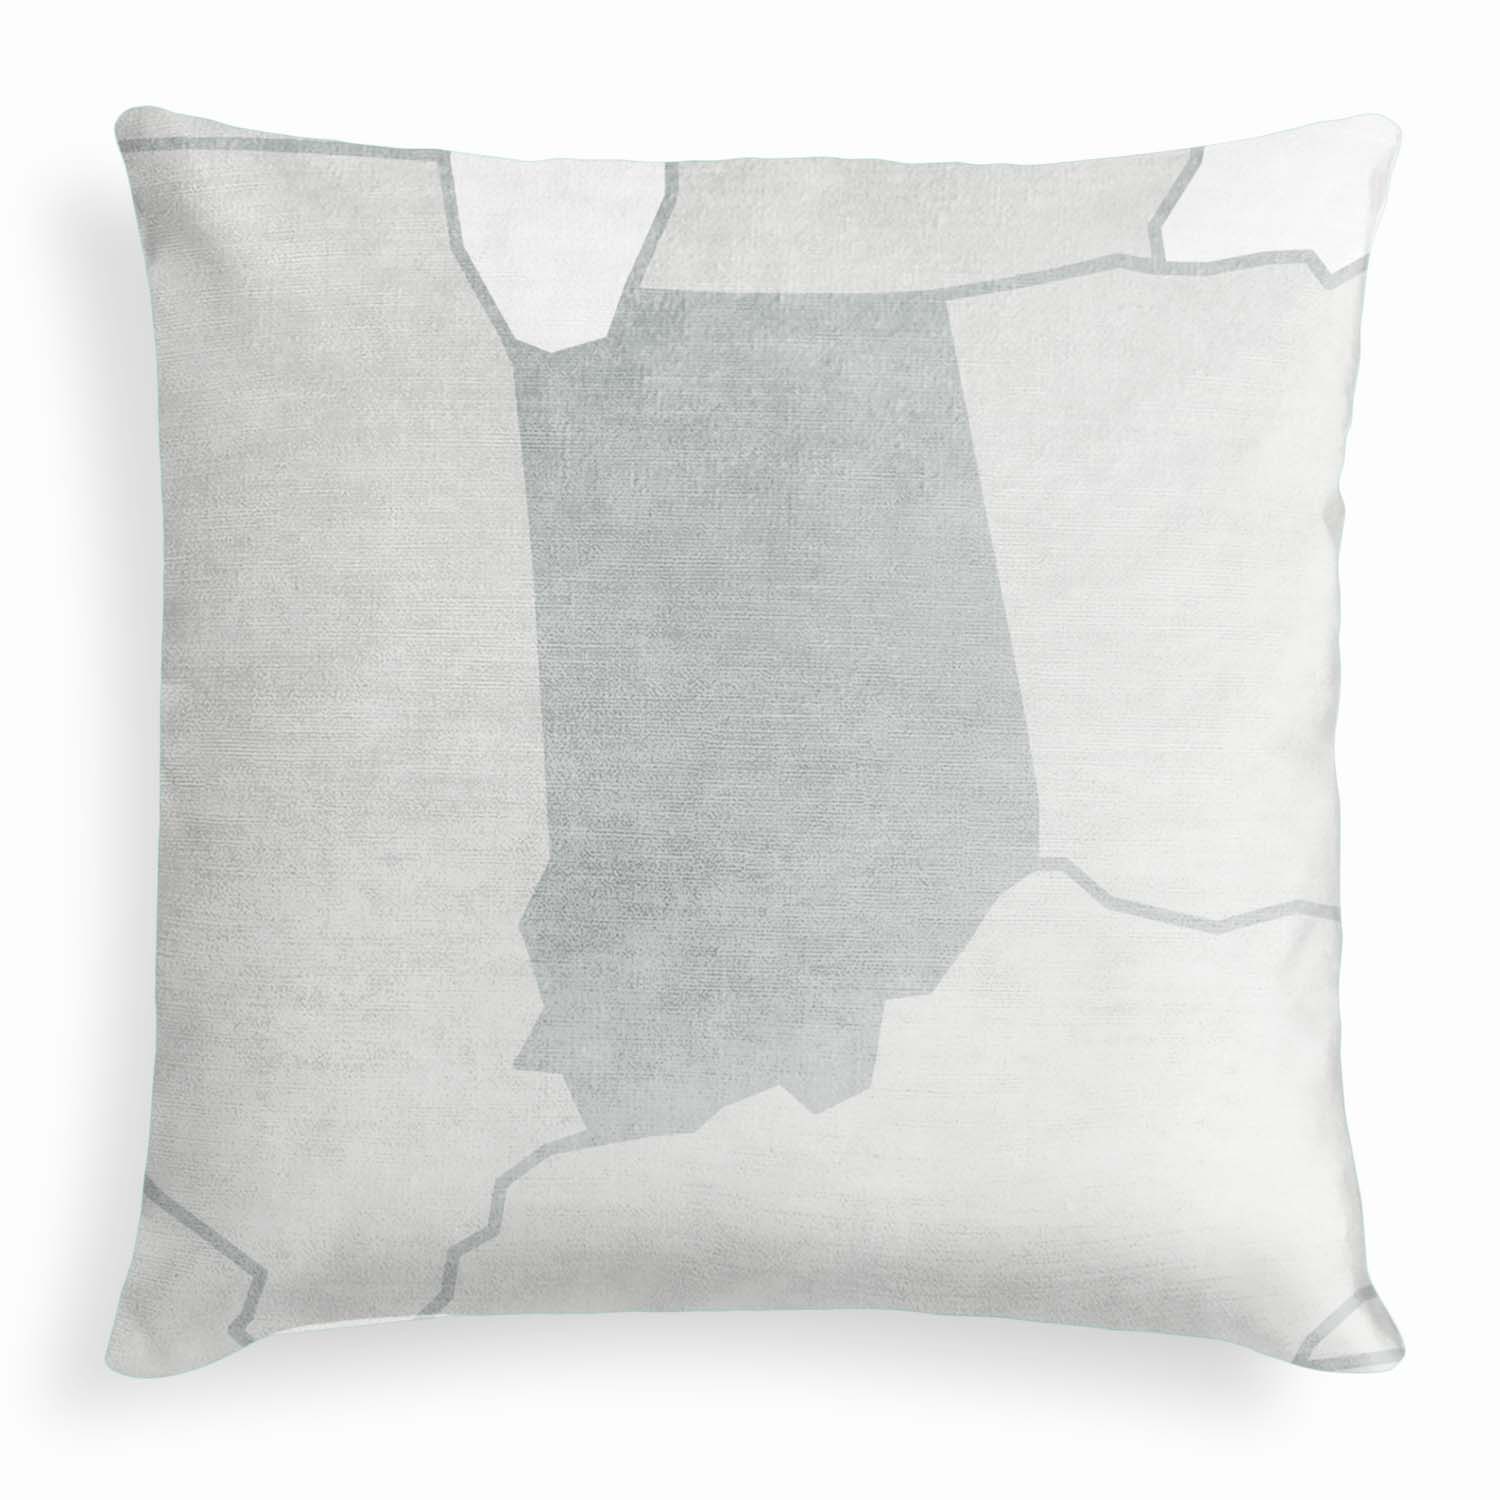 Indiana Square Pillow - Velvet -  - Knotty Tie Co.